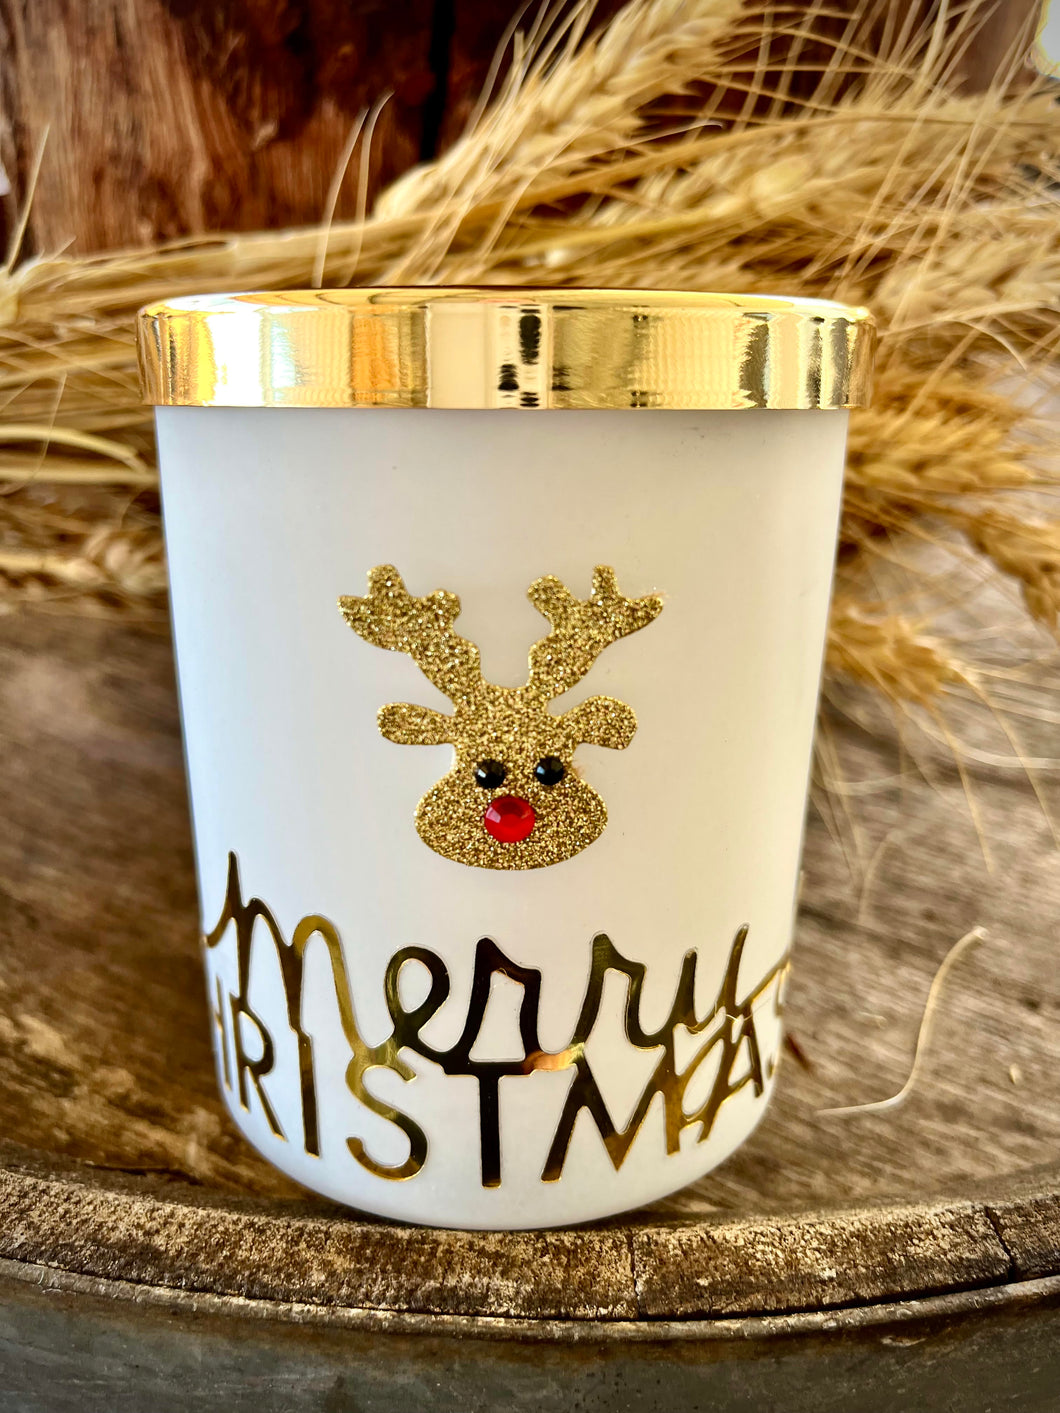 Gold Club Reindeer Candle - Frosted Cranberry